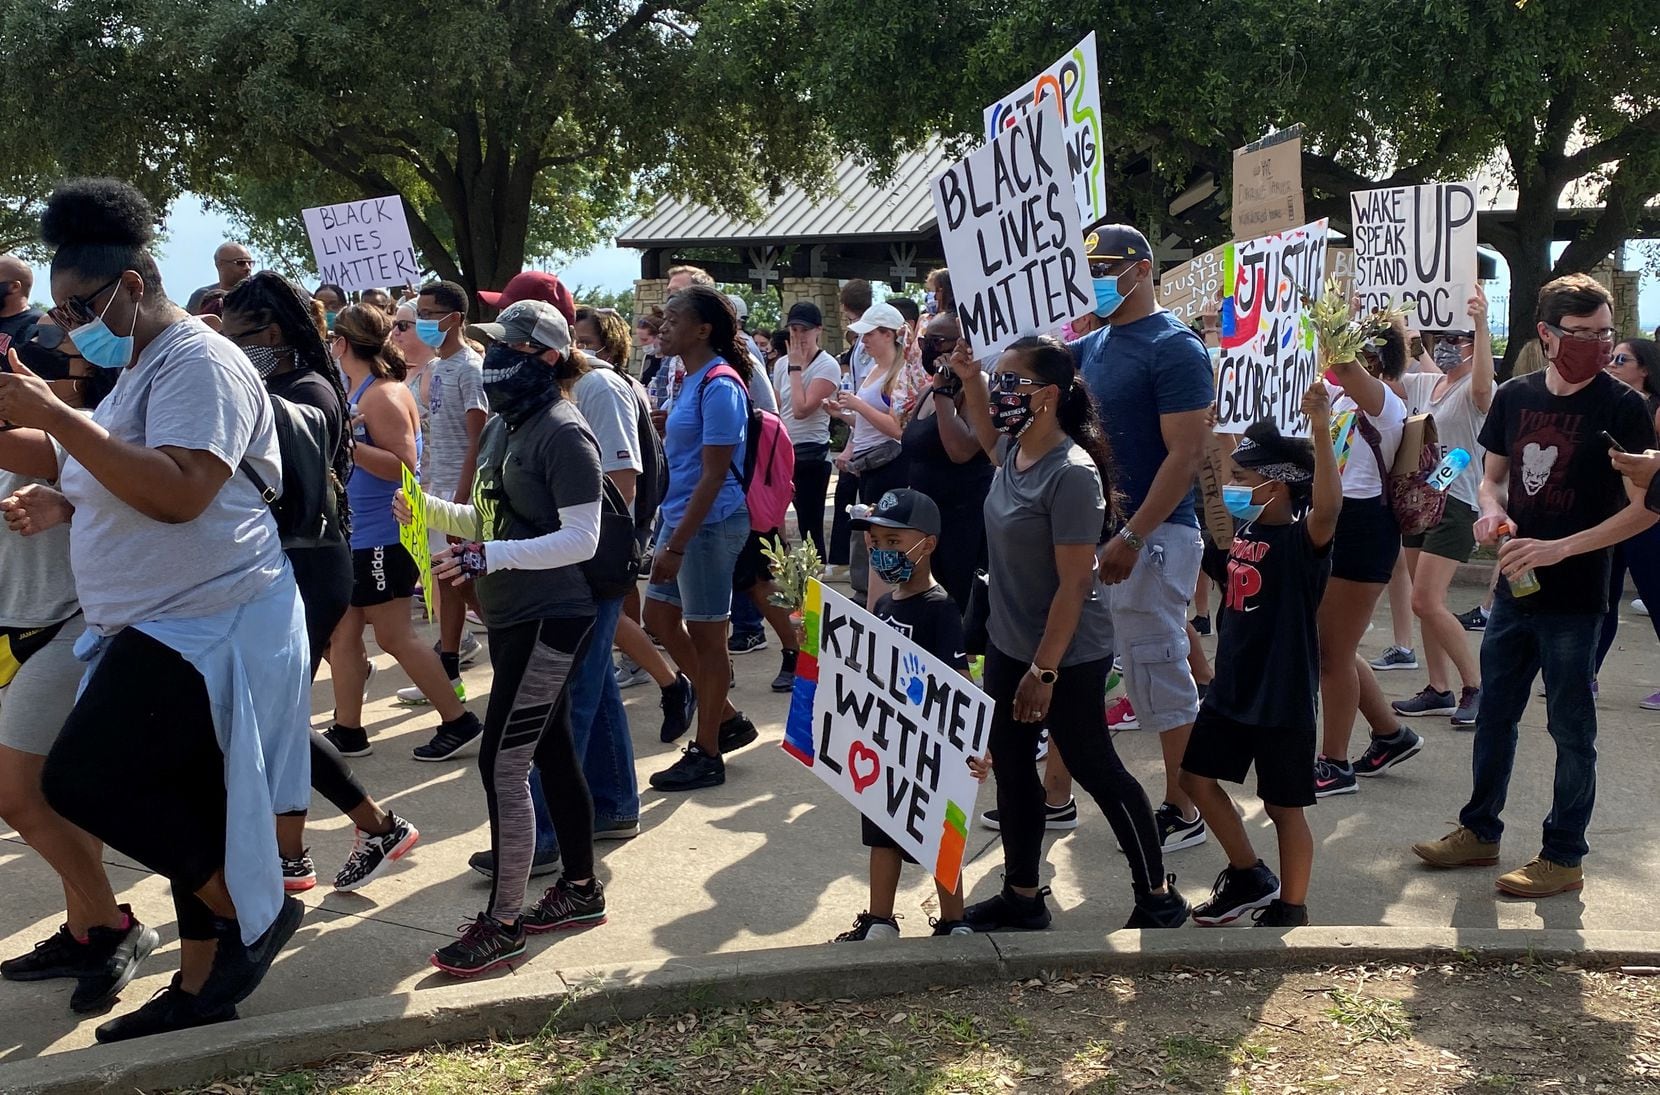 Protesters march against police violence on June 1, 2020 in Frisco, Texas.